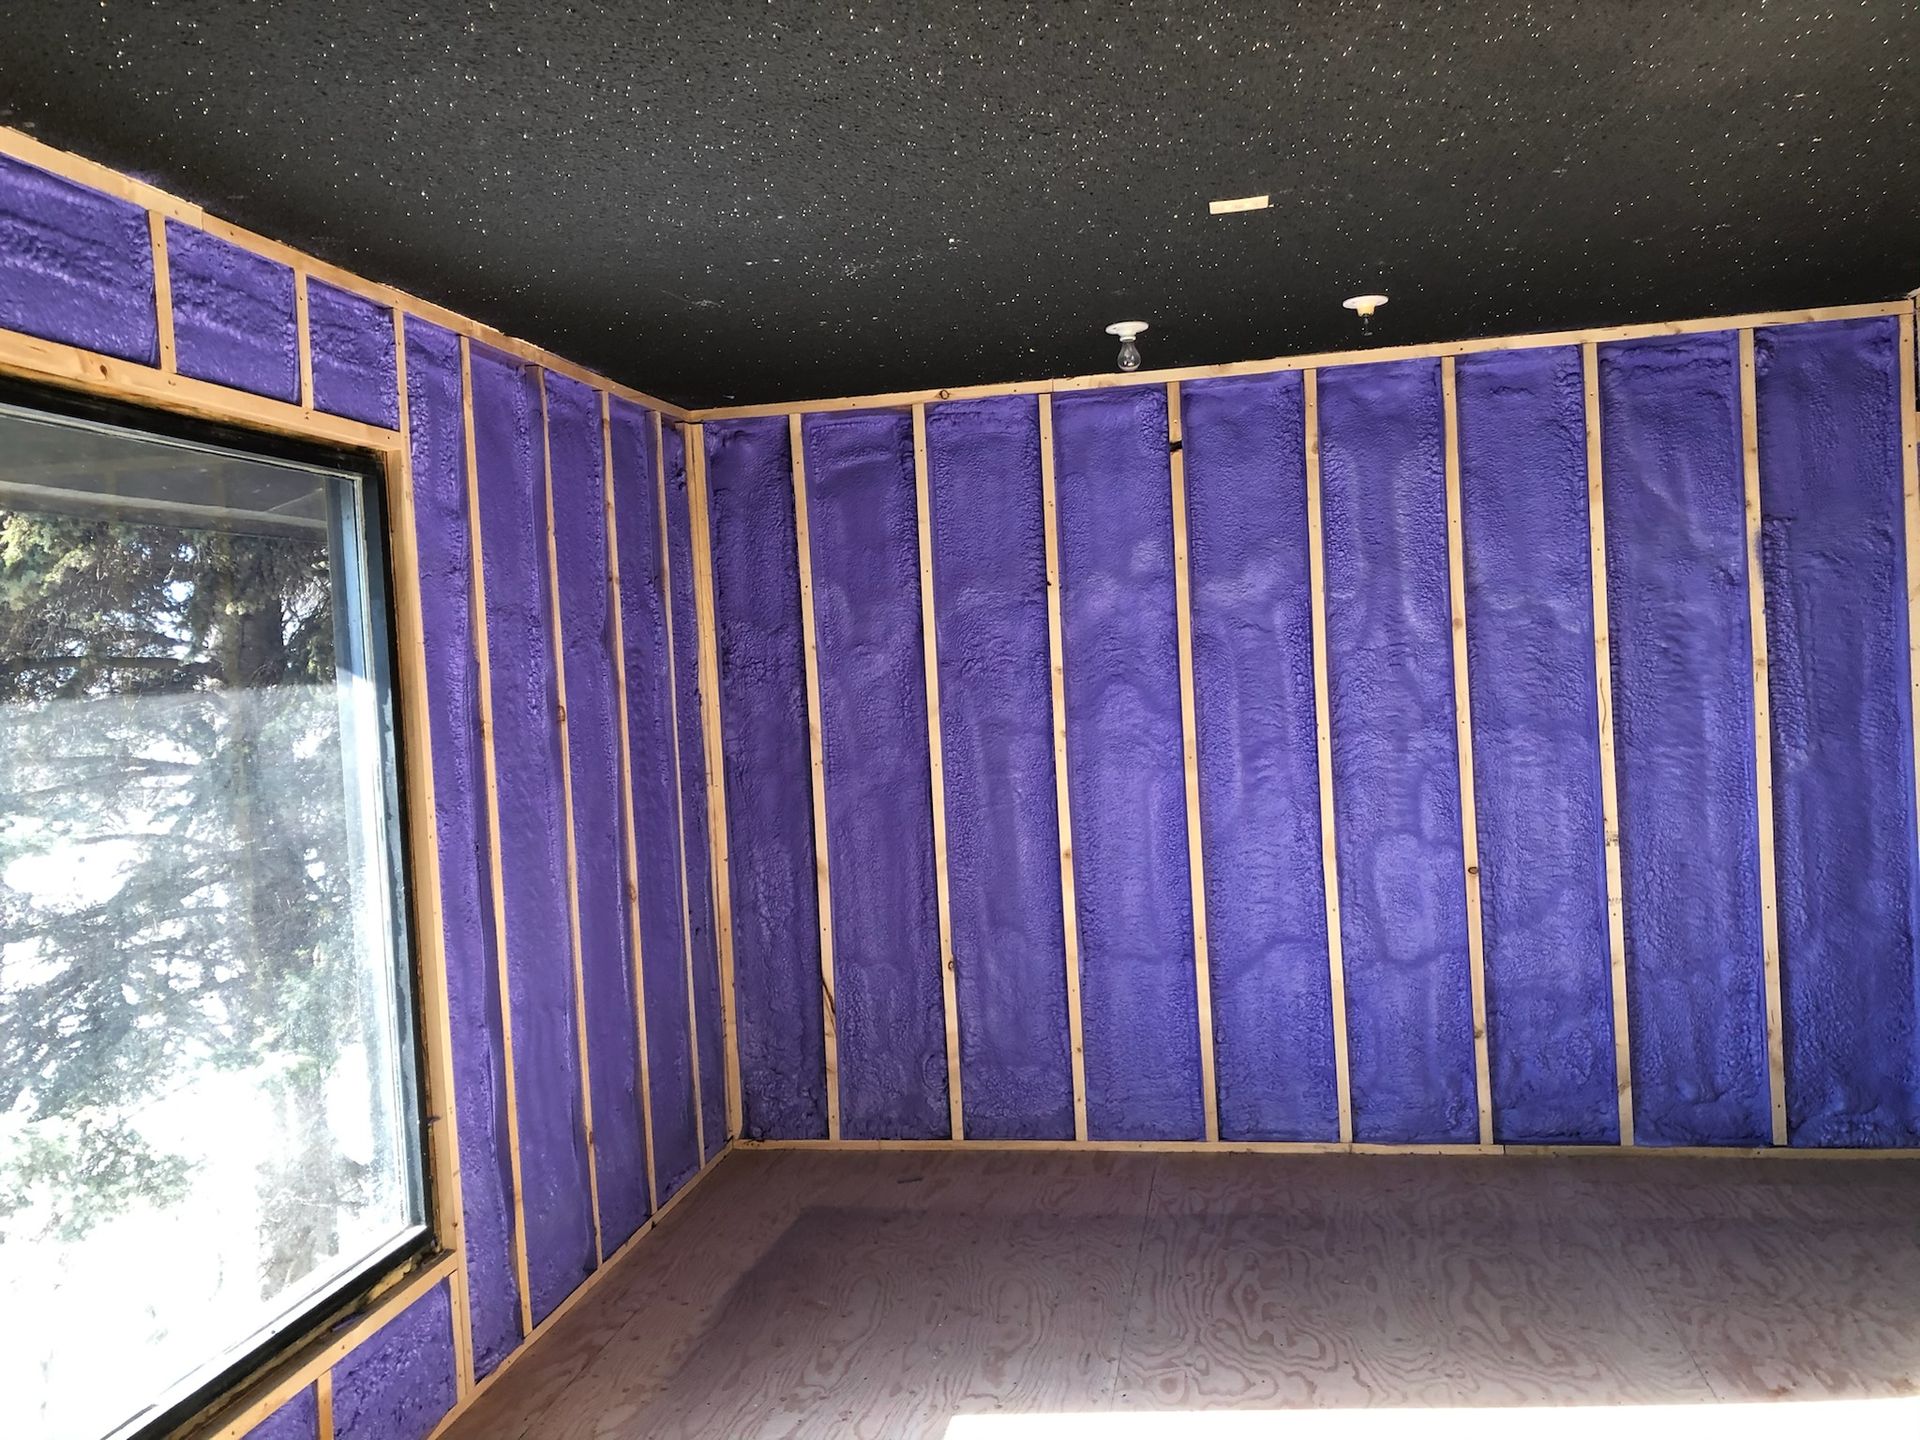 A room with purple walls and a window